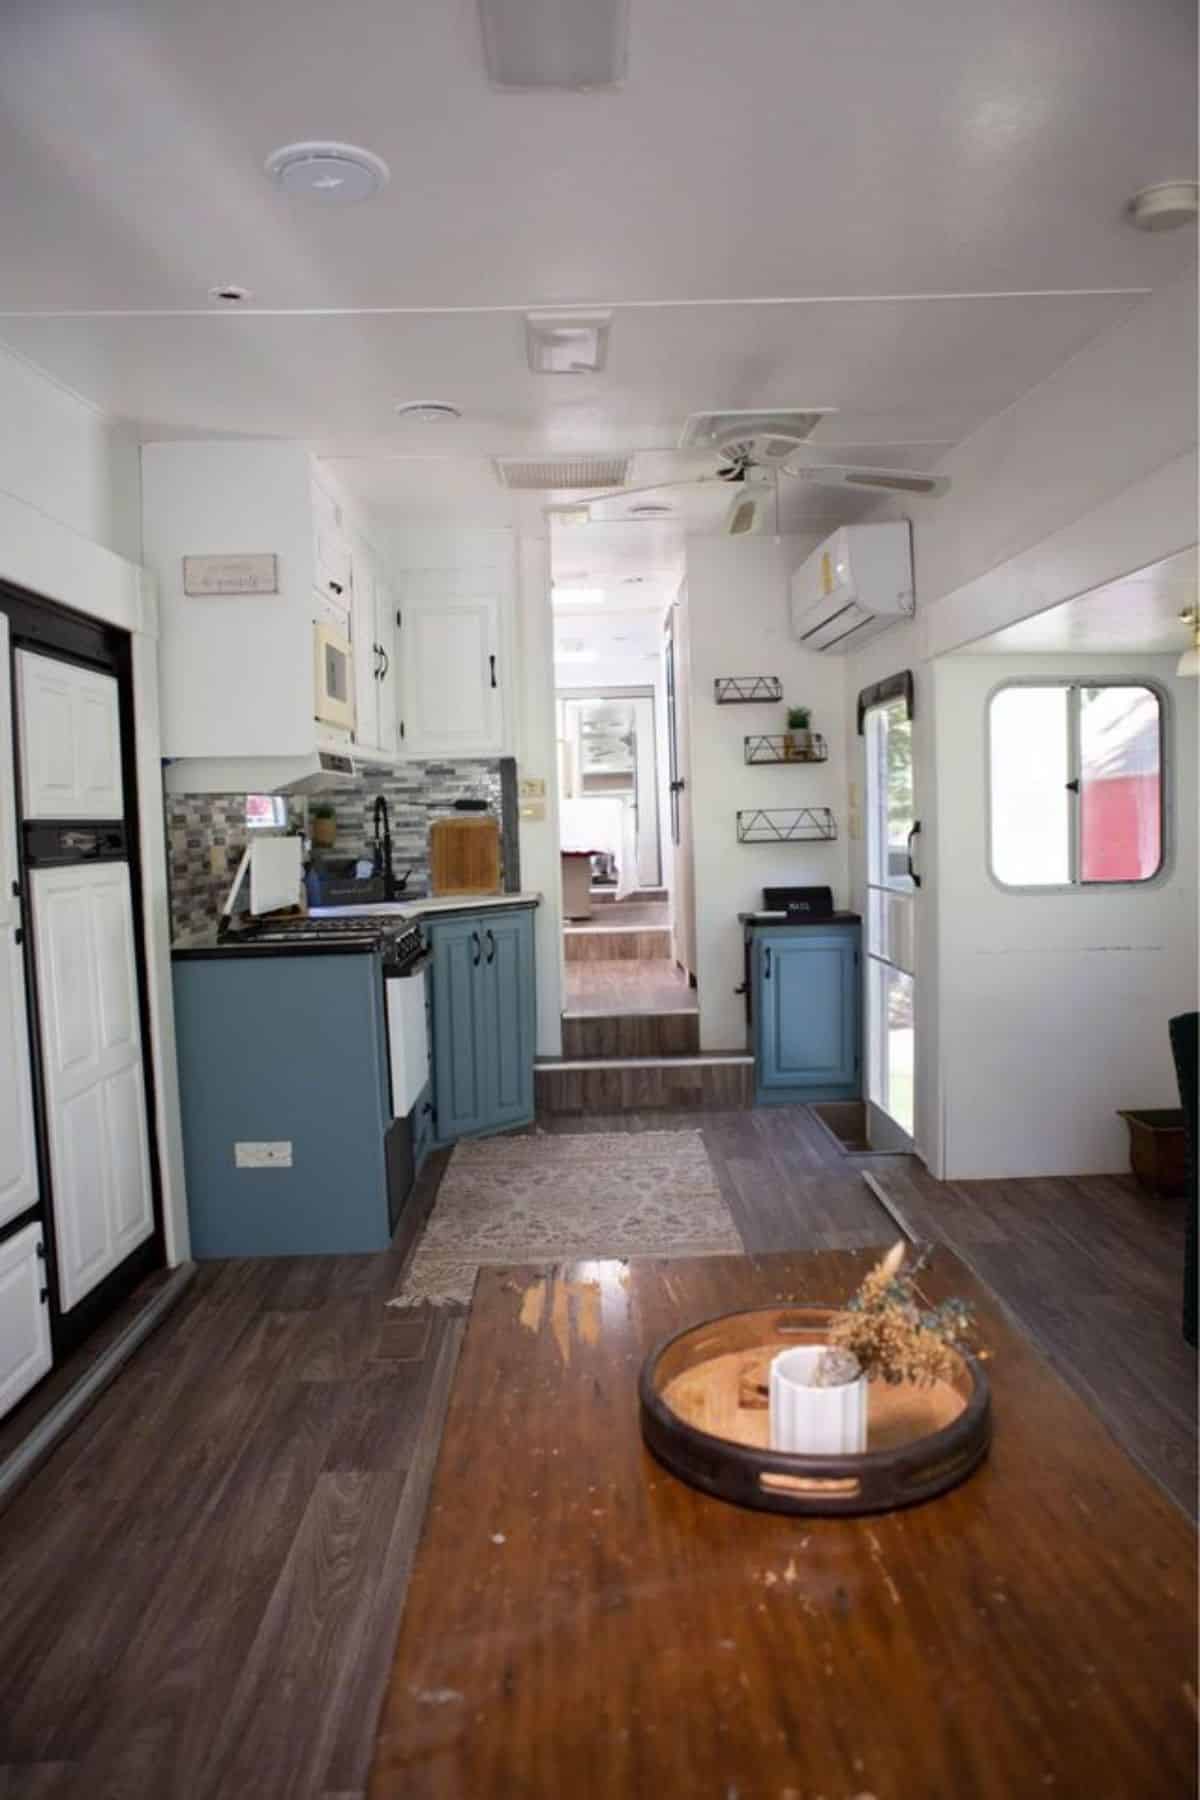 Overall view of 37’ Upgraded Tiny House from living area